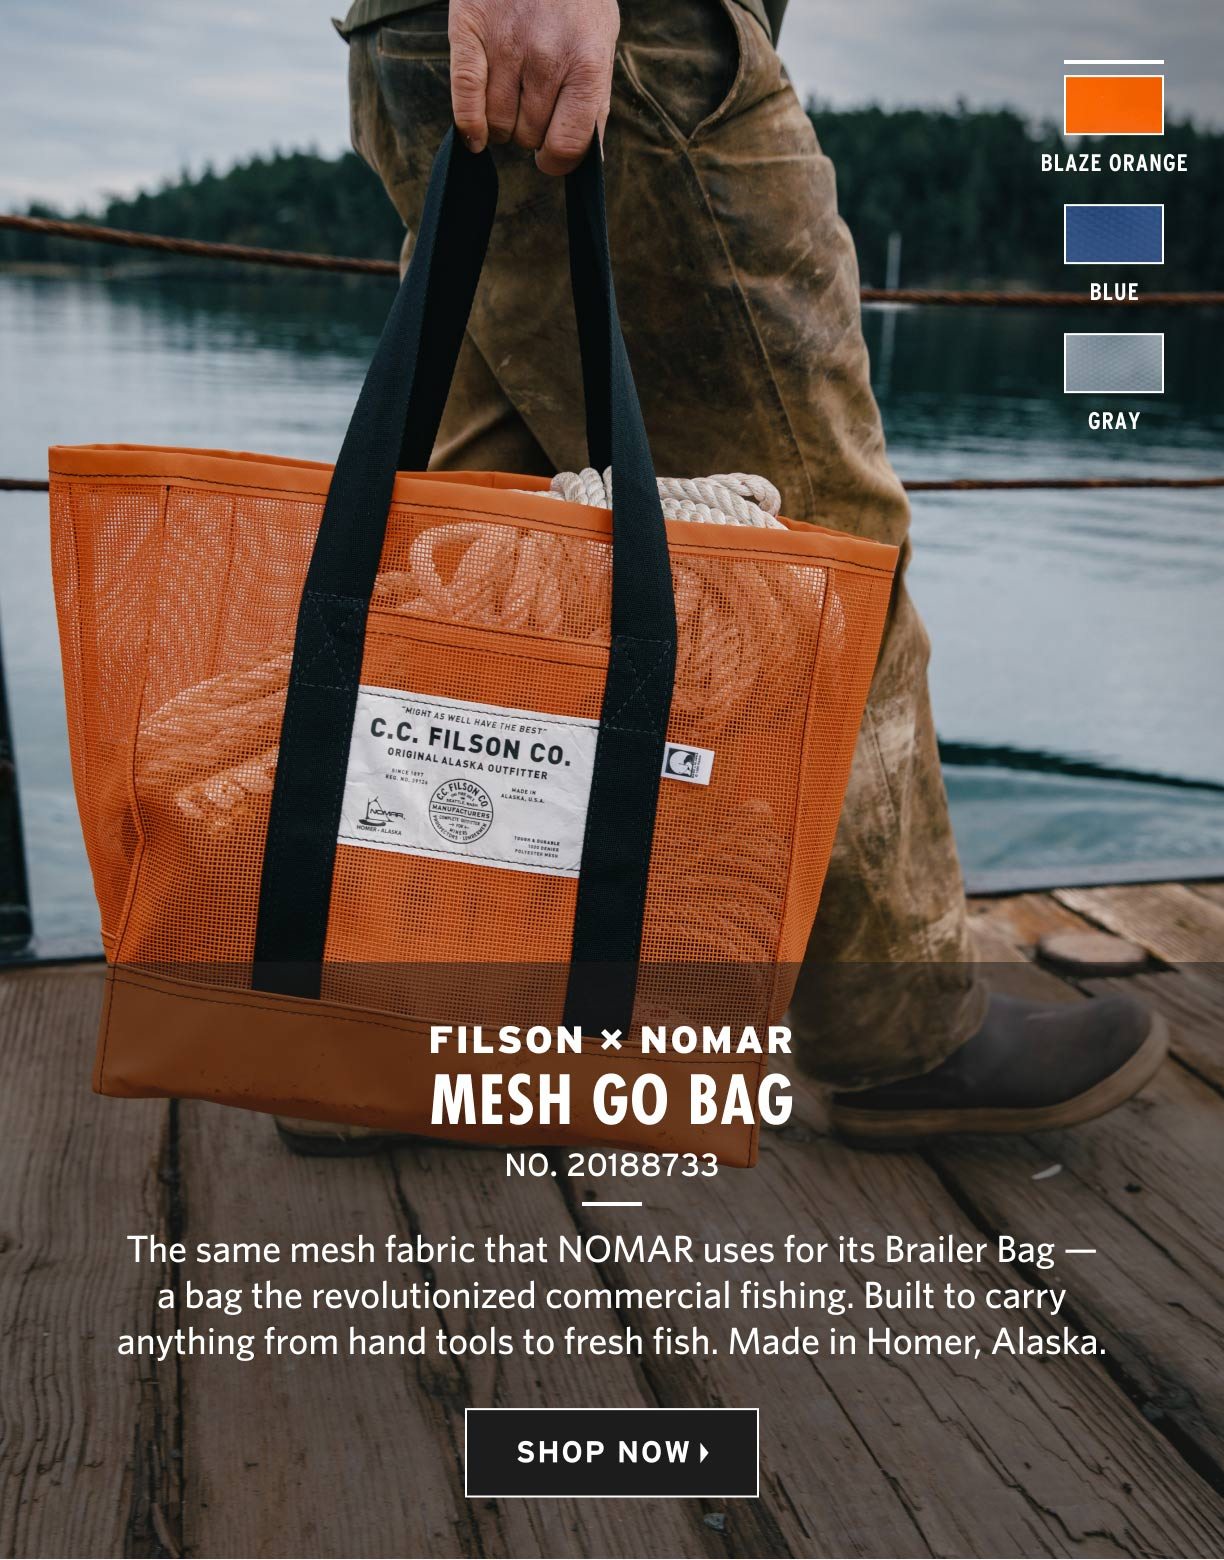 New NOMAR Gear & Apparel - Filson Email Archive